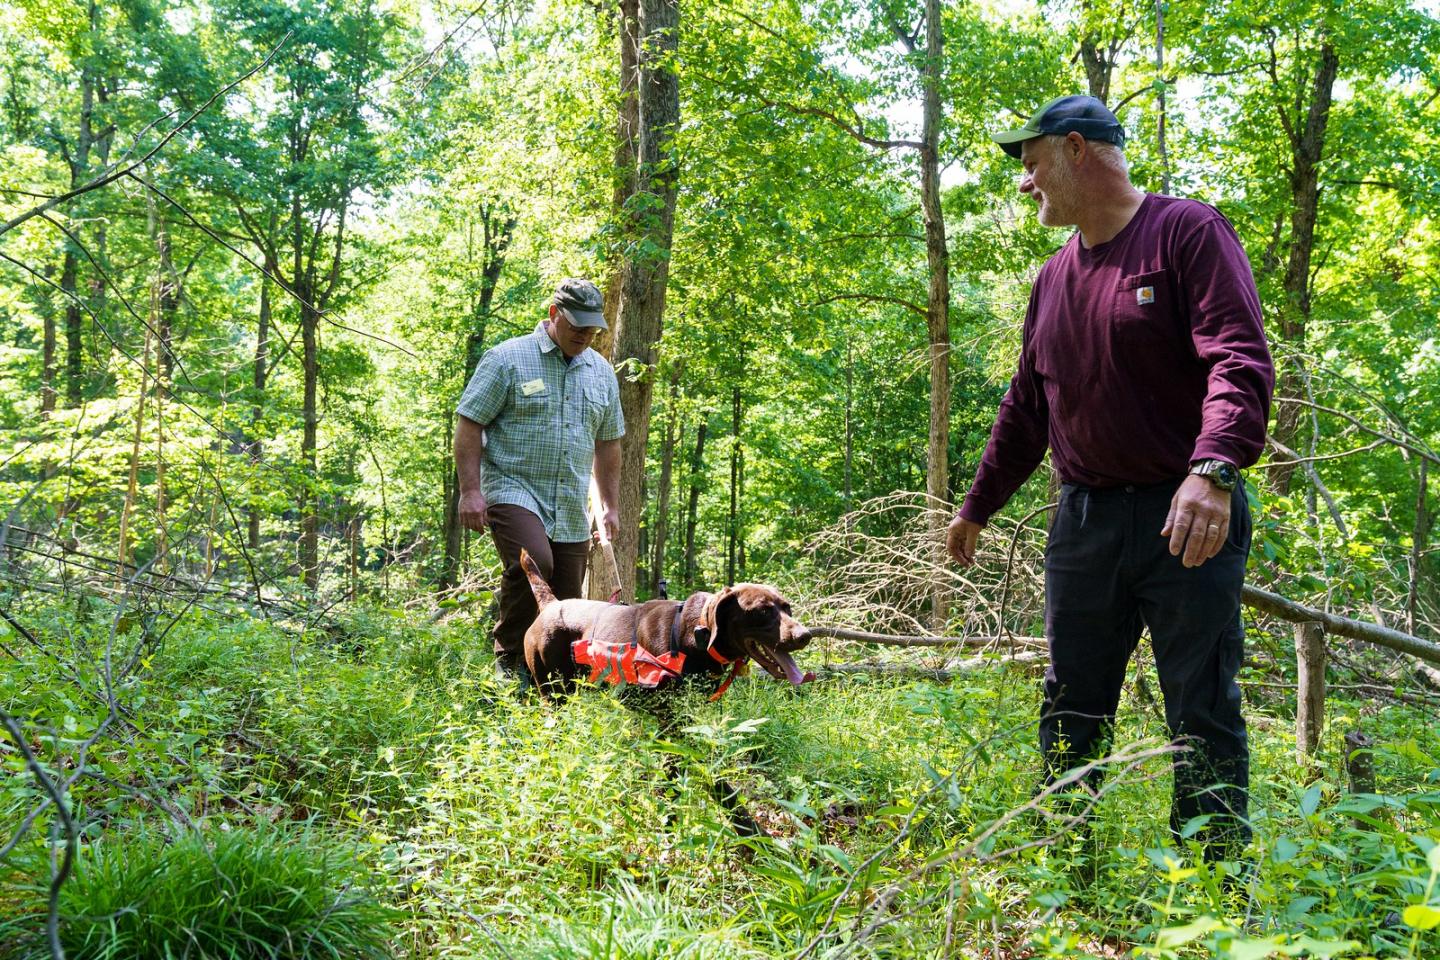 Indiana NRCS State Forester Daniel Shaver (left), David Ray and Ray;s dog Dasher check out the ongoing work being done at a private forest owned by Ray in Jackson County, IN during a visit May 24, 2022. Ray purchased 310 acres of forestland in 1995 to use for recreational purposes including hunting, hiking and foraging. Ray enrolled his land in NRCS’ Environmental Quality Incentives Program in 2017 for forest stand improvement and brush management. After the conclusion of his EQIP contract, he enrolled th